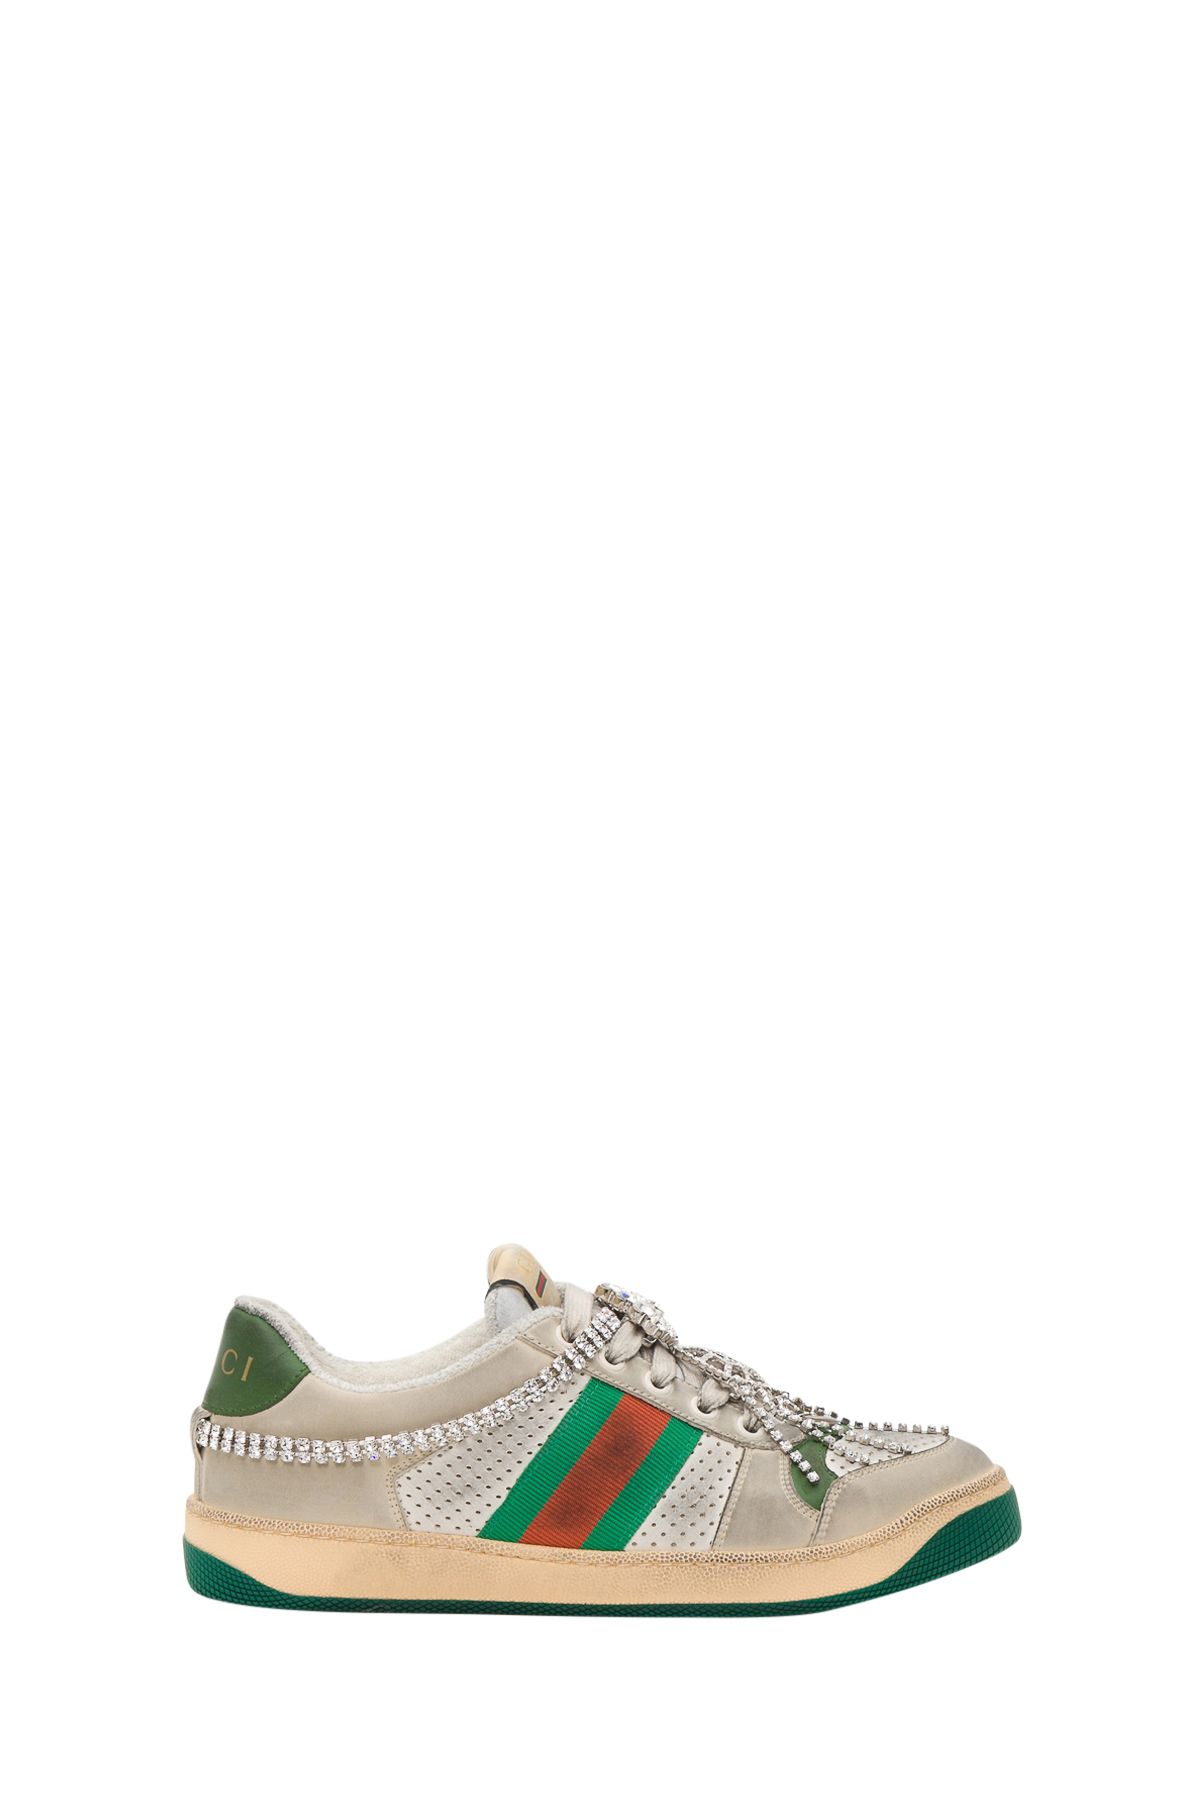 Gucci Gucci Screener Sneaker With Crystals - White - 10916404 | italist